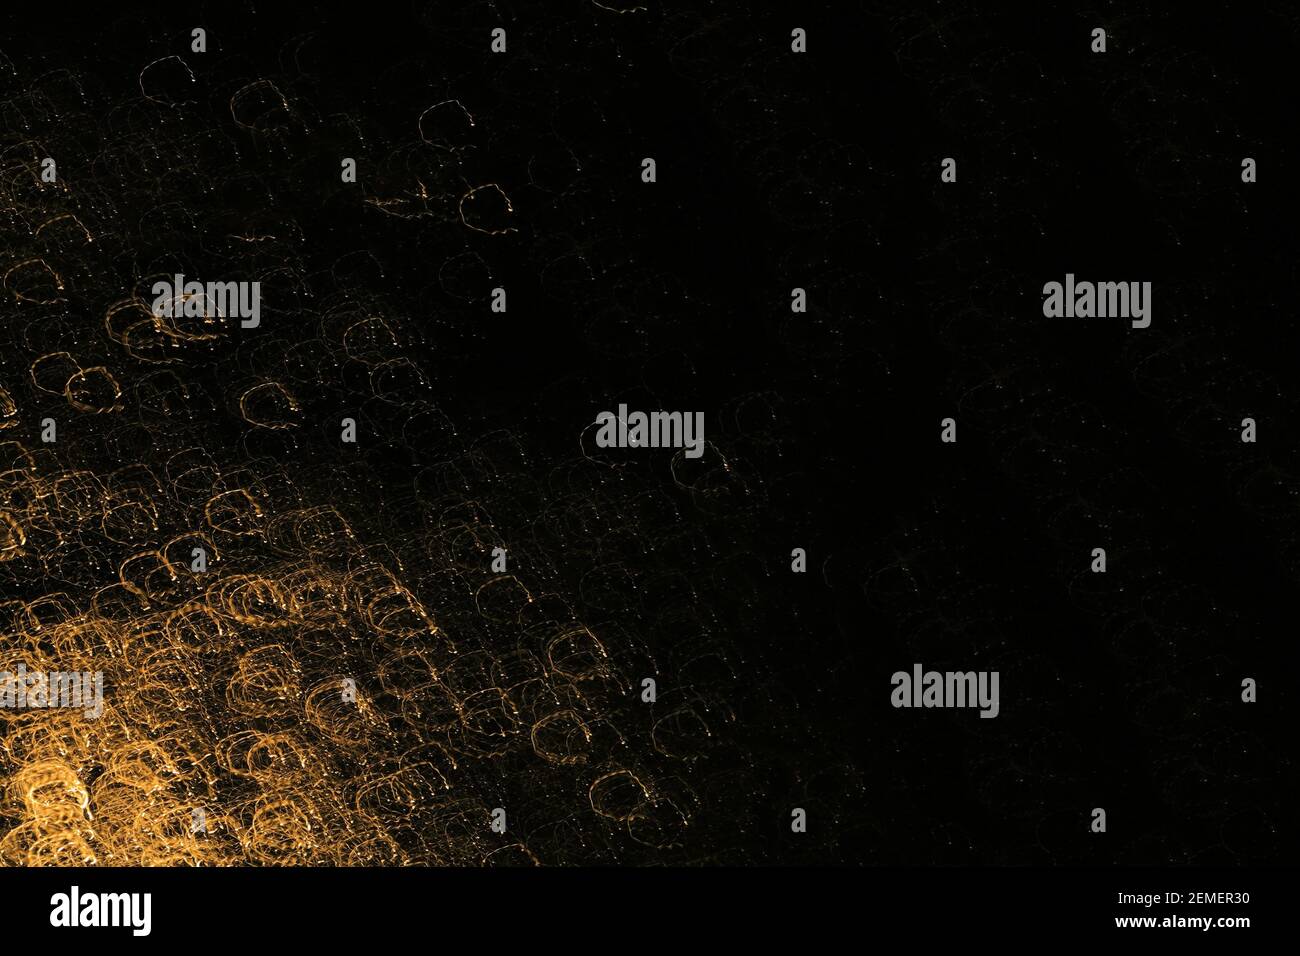 Black surface with circle shaped gold textures of light with long shutter speed at night; color photo, No.1. Stock Photo